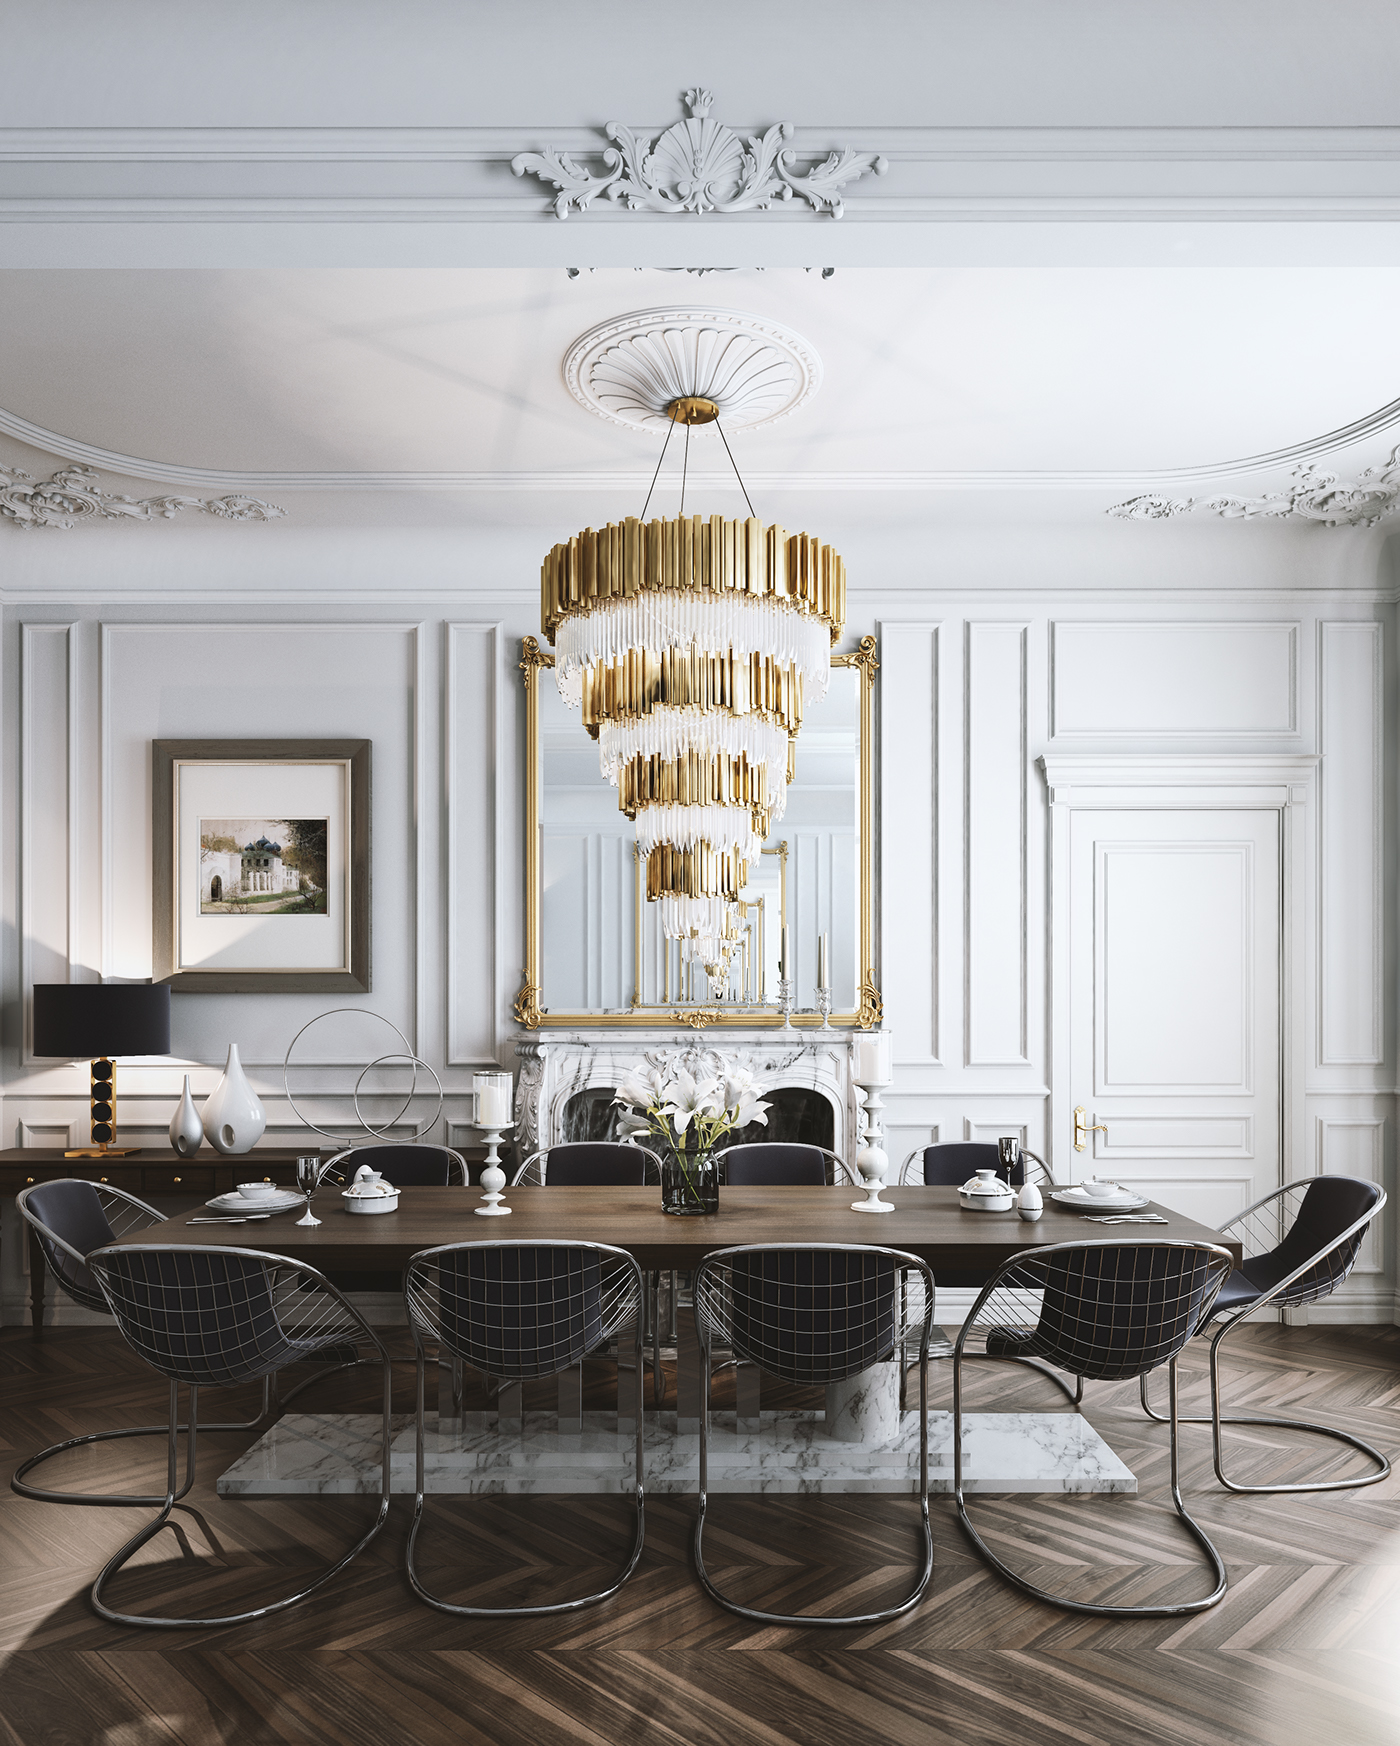 15 Modern Dining Room Ideas You Need to Get Inspired By